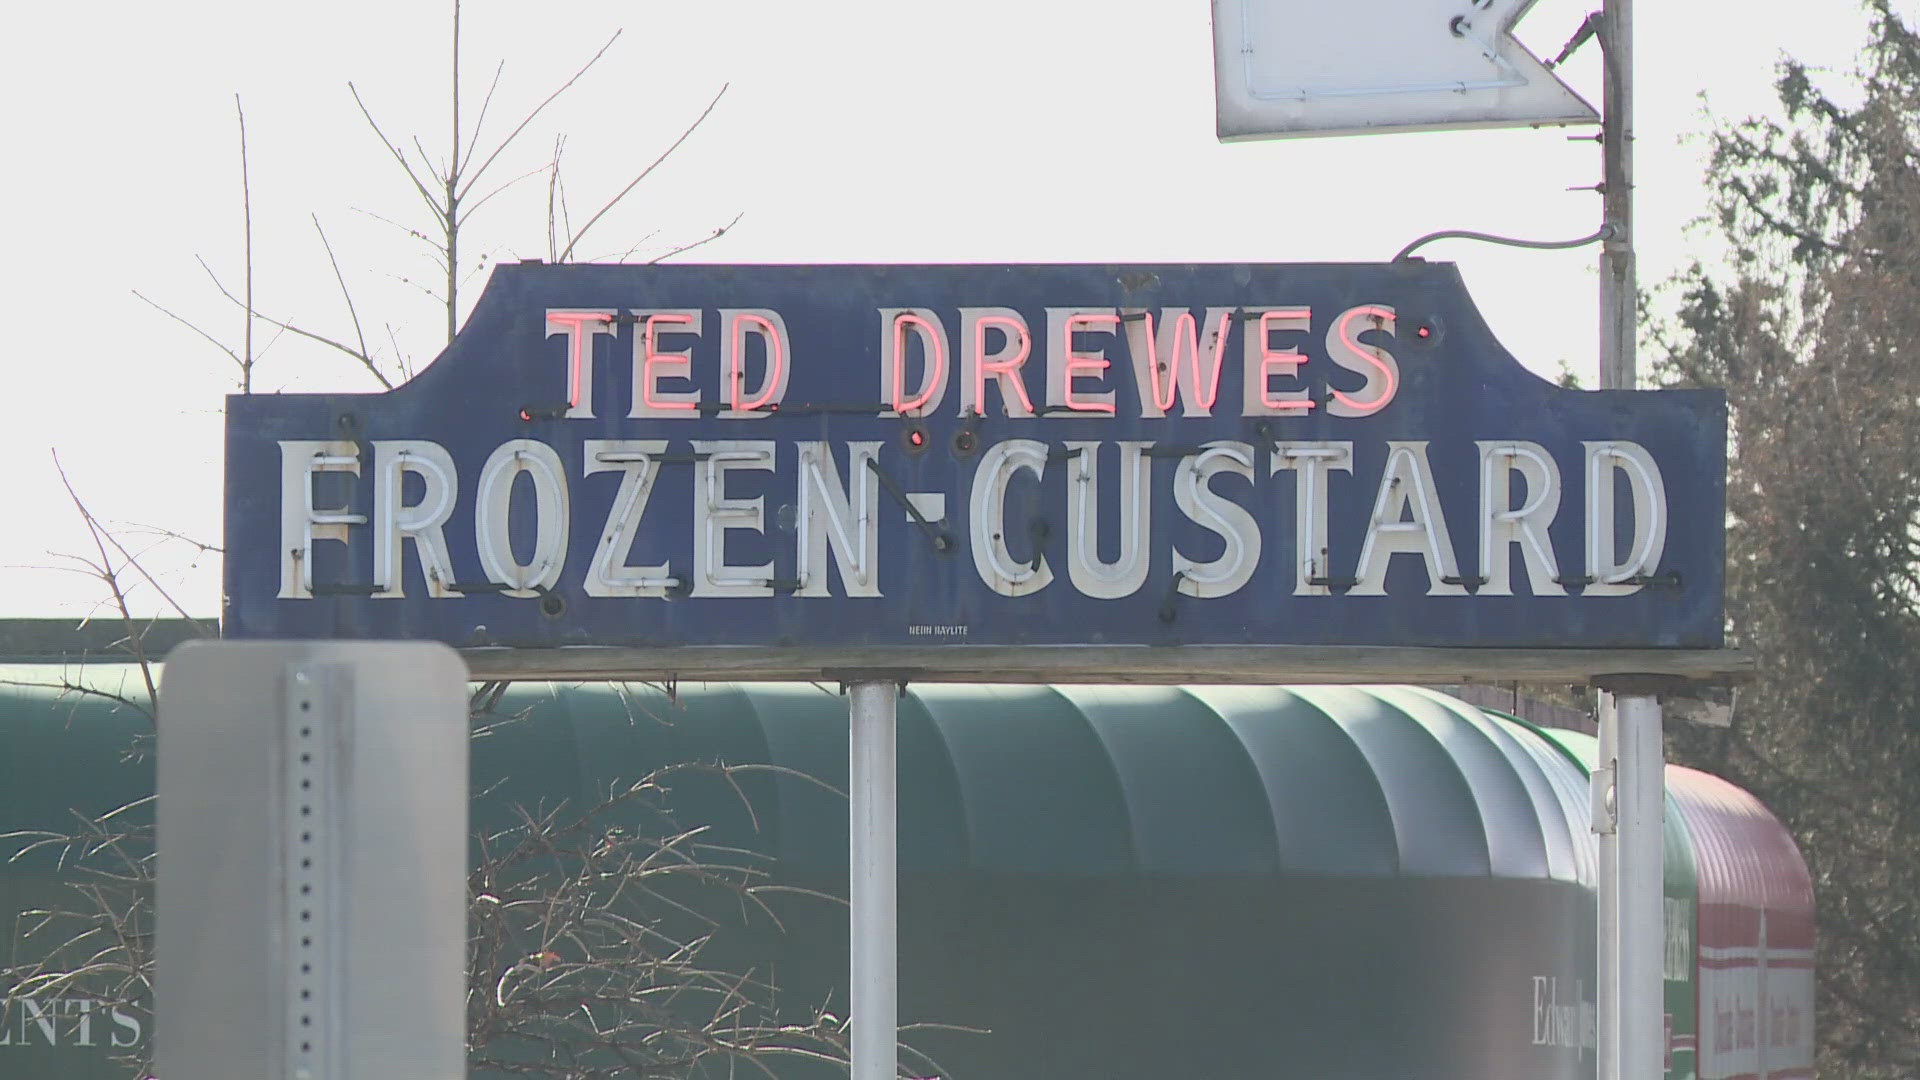 St. Louis' iconic custard maker Ted Drewes is celebrating its 95th anniversary on Thursday with 95-cent cones. Profits will go to three local charities.